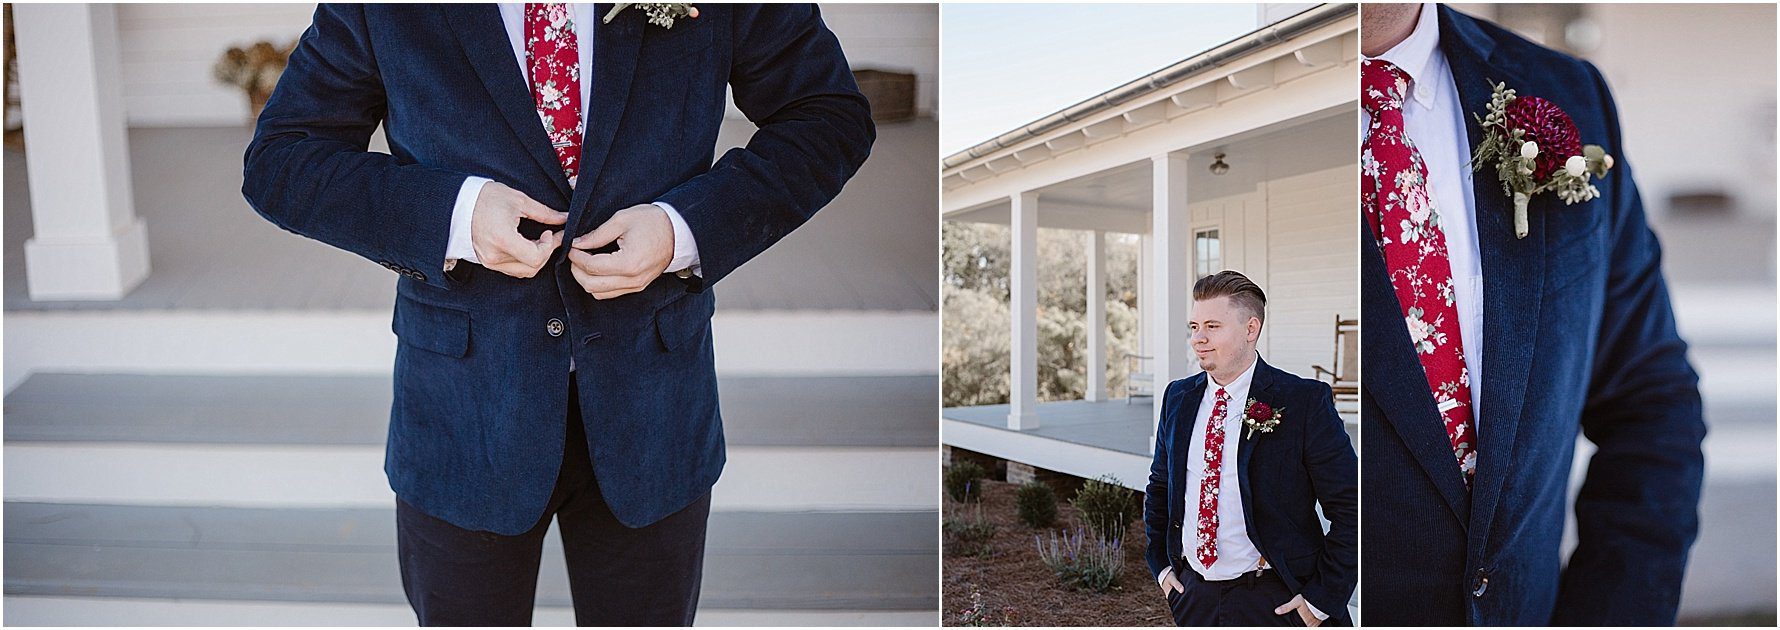 Navy suit for a wedding | Erin Morrison Photography www.erinmorrisonphotography.com